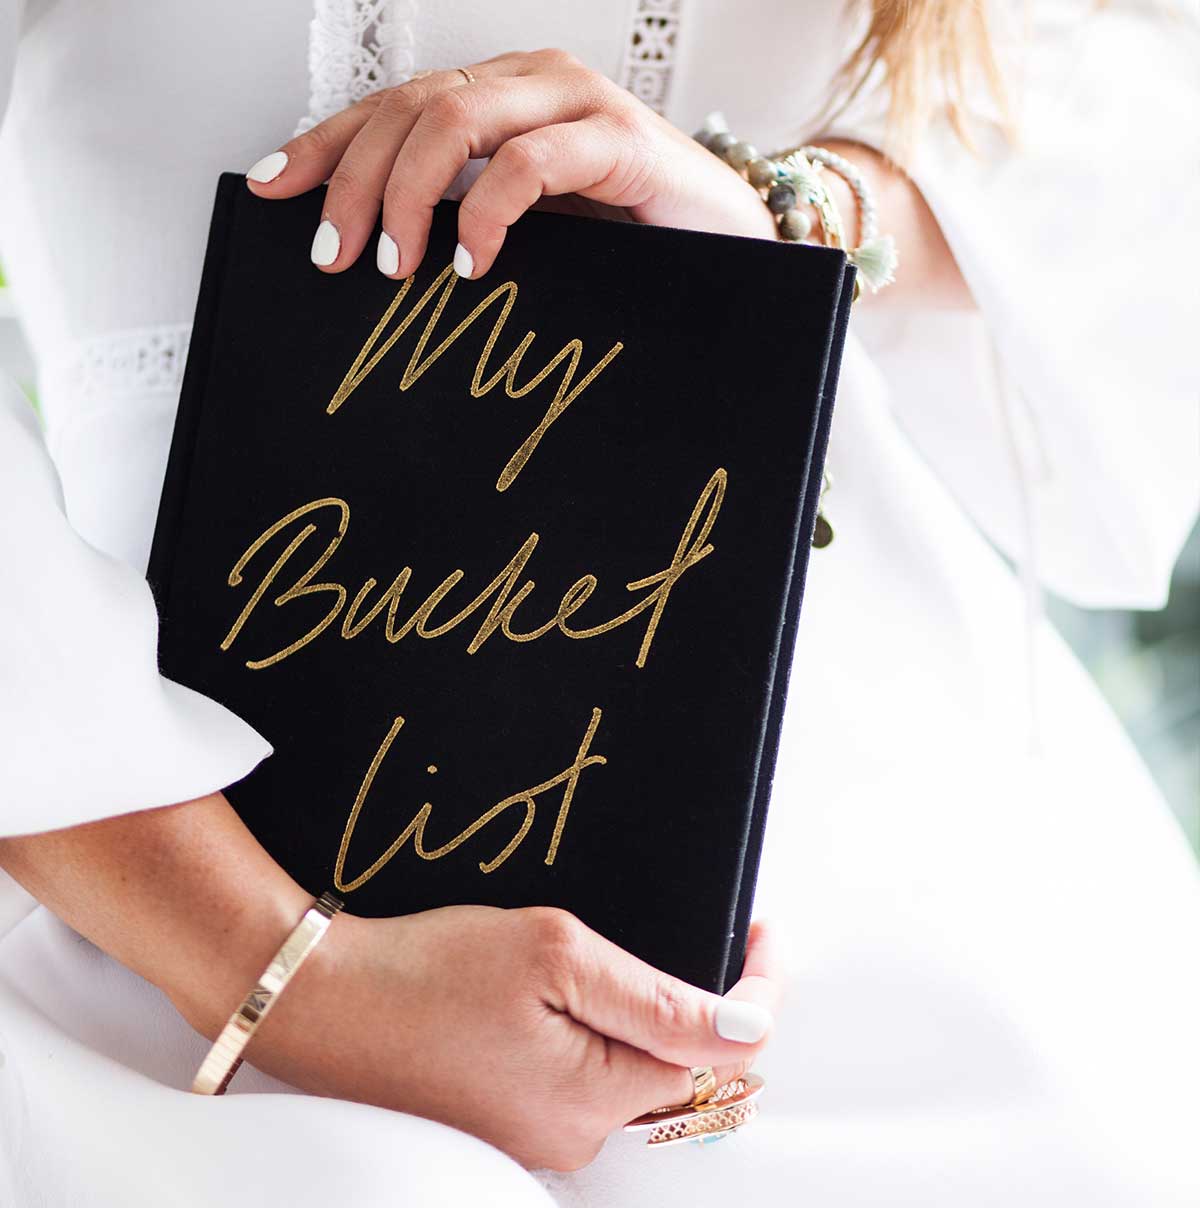 lady in white dress holding a bucket list book